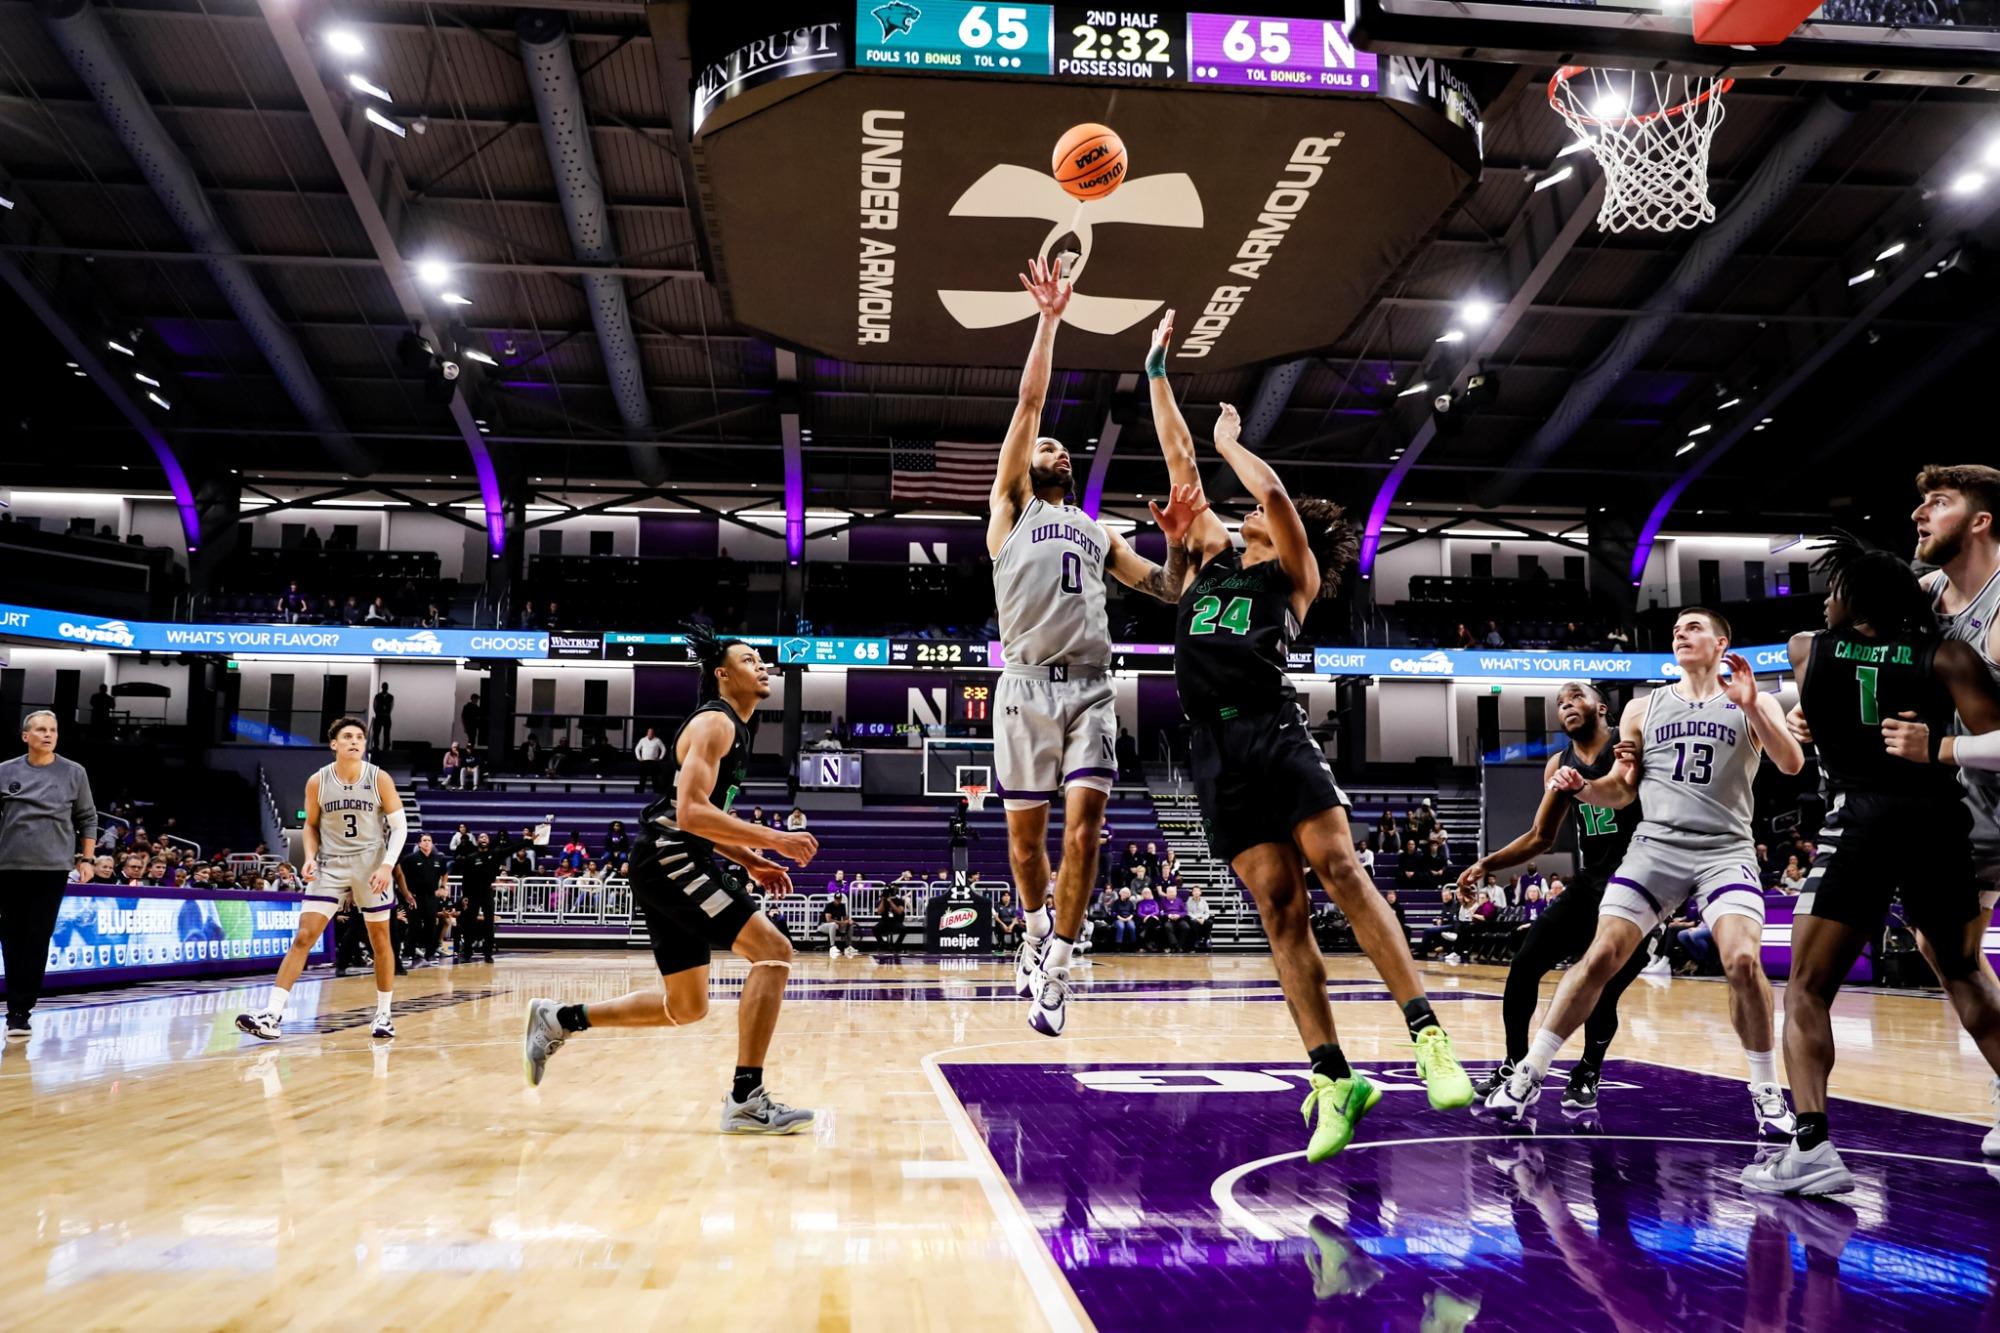 Northwestern men's basketball crushes Chicago State in historic game